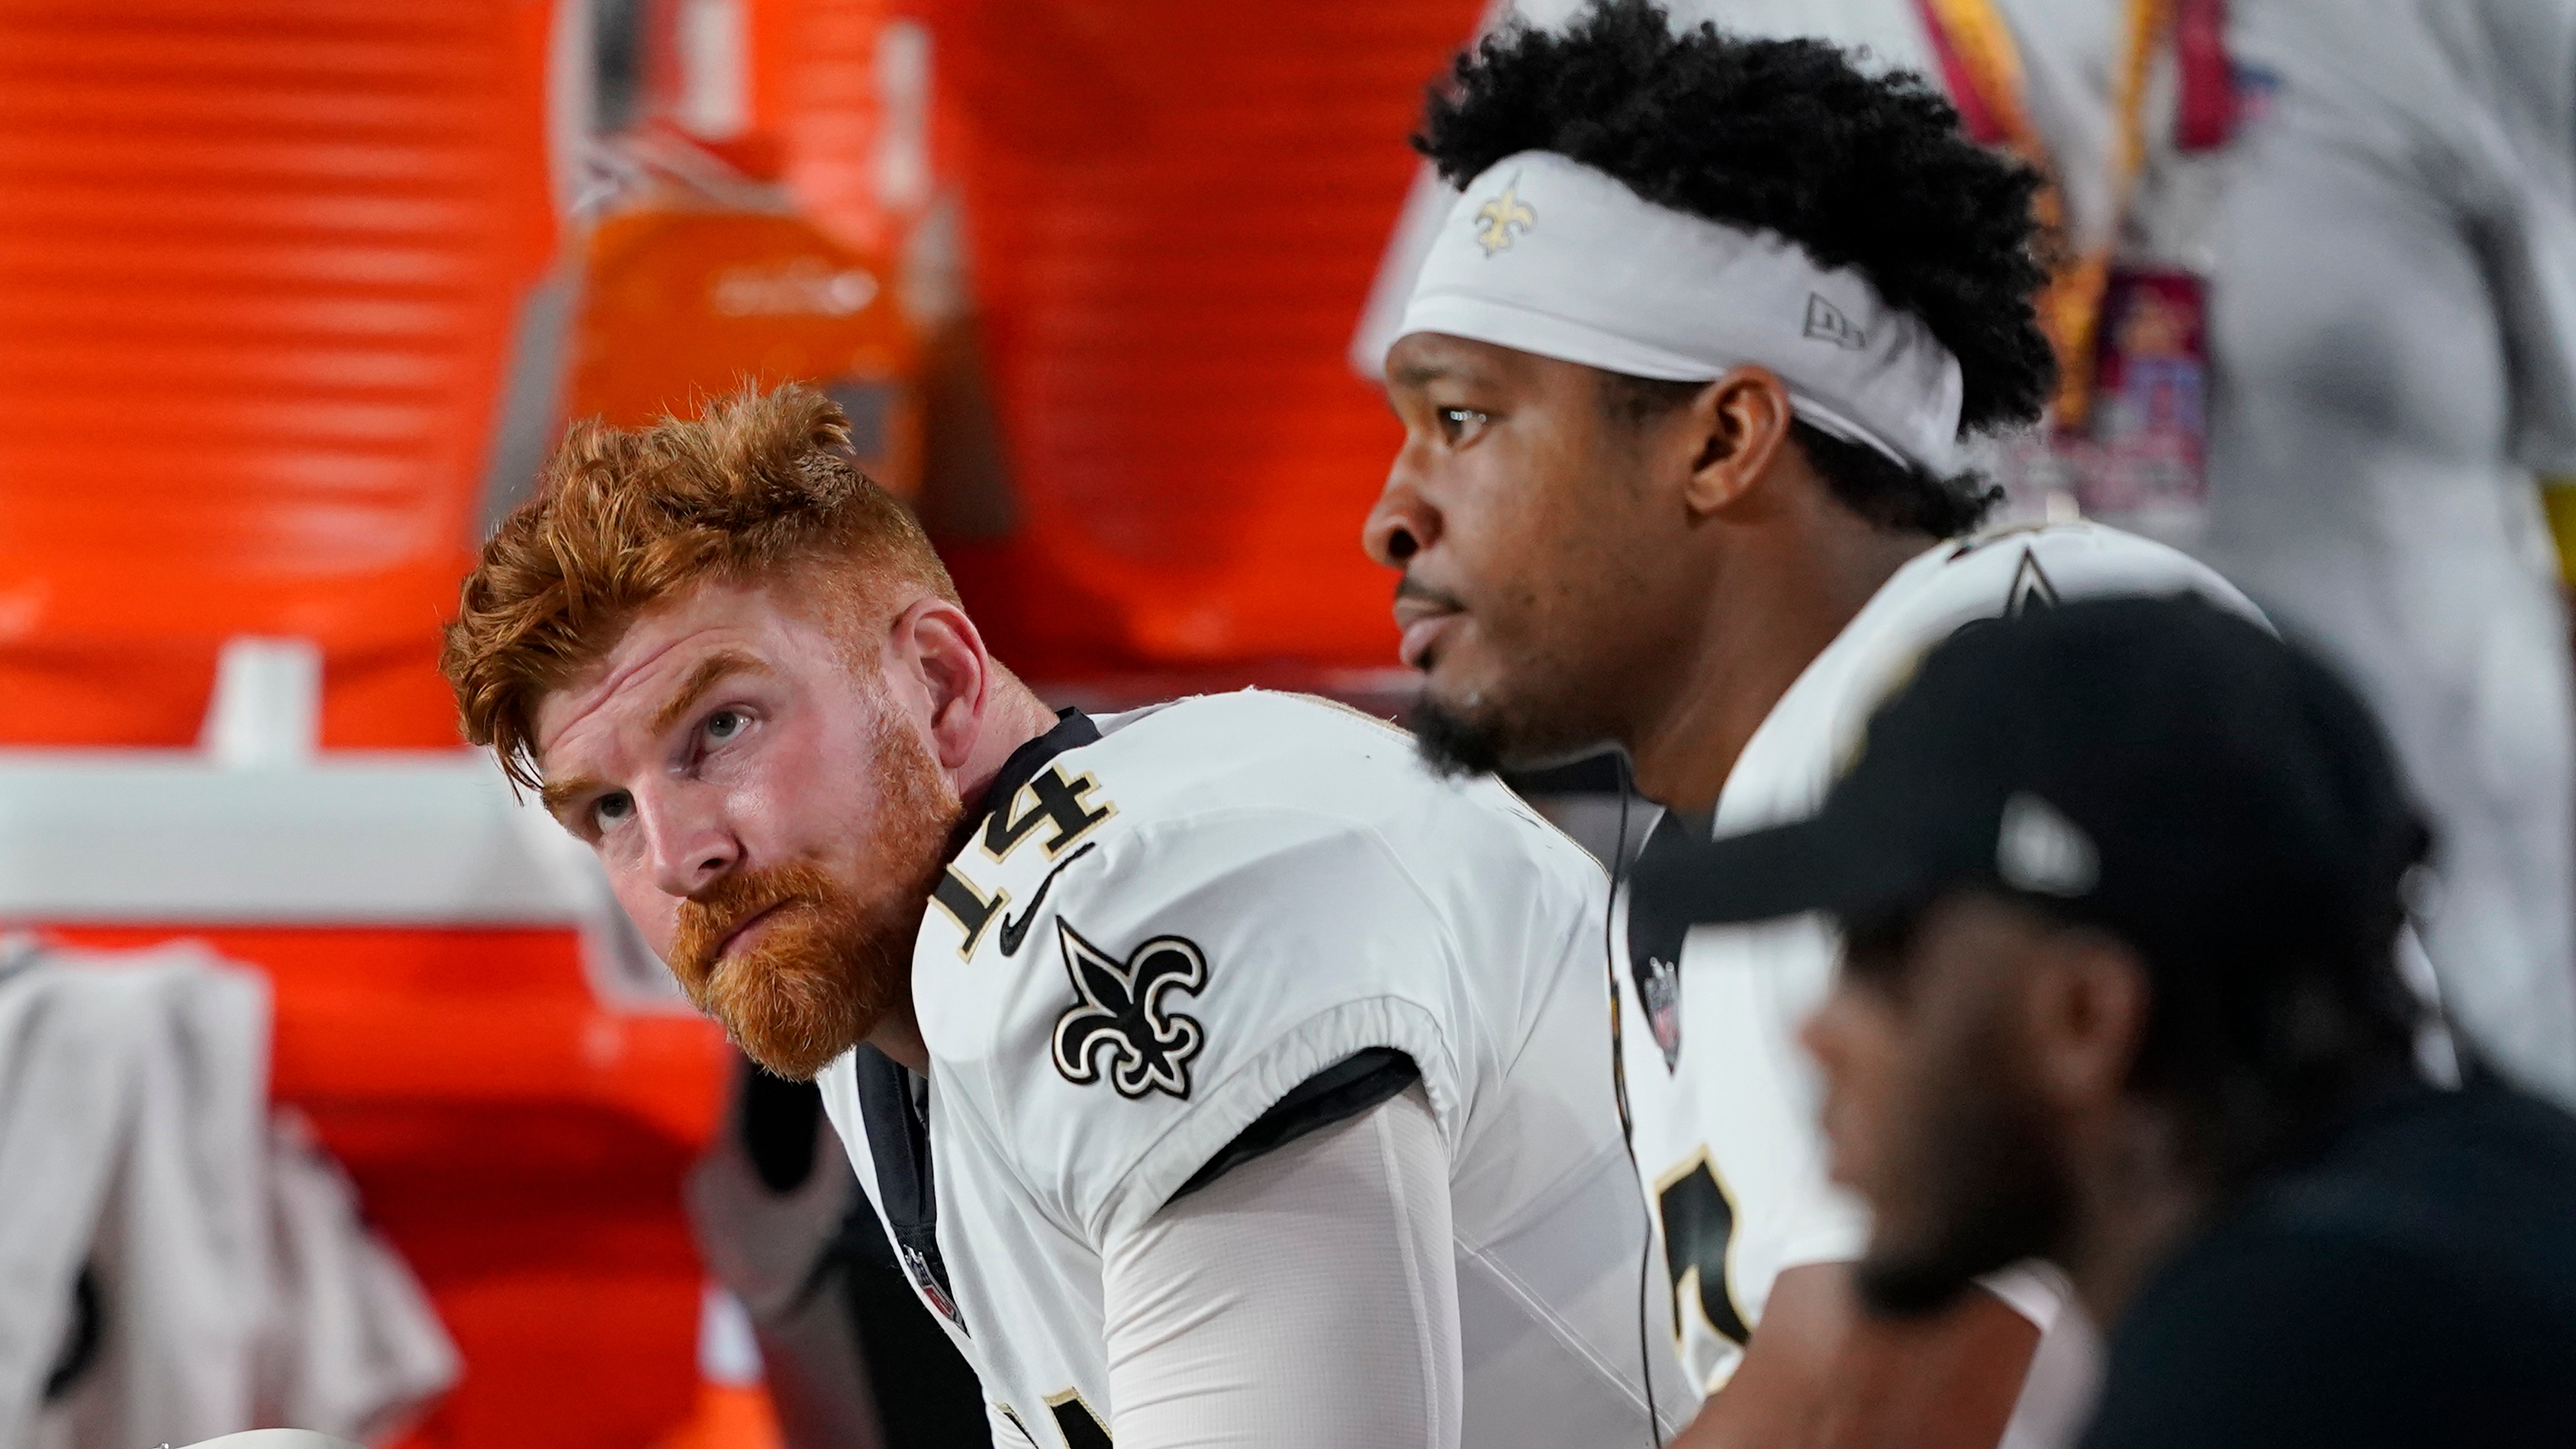 Andy Dalton to start vs Raiders even with healthy Jameis Winston